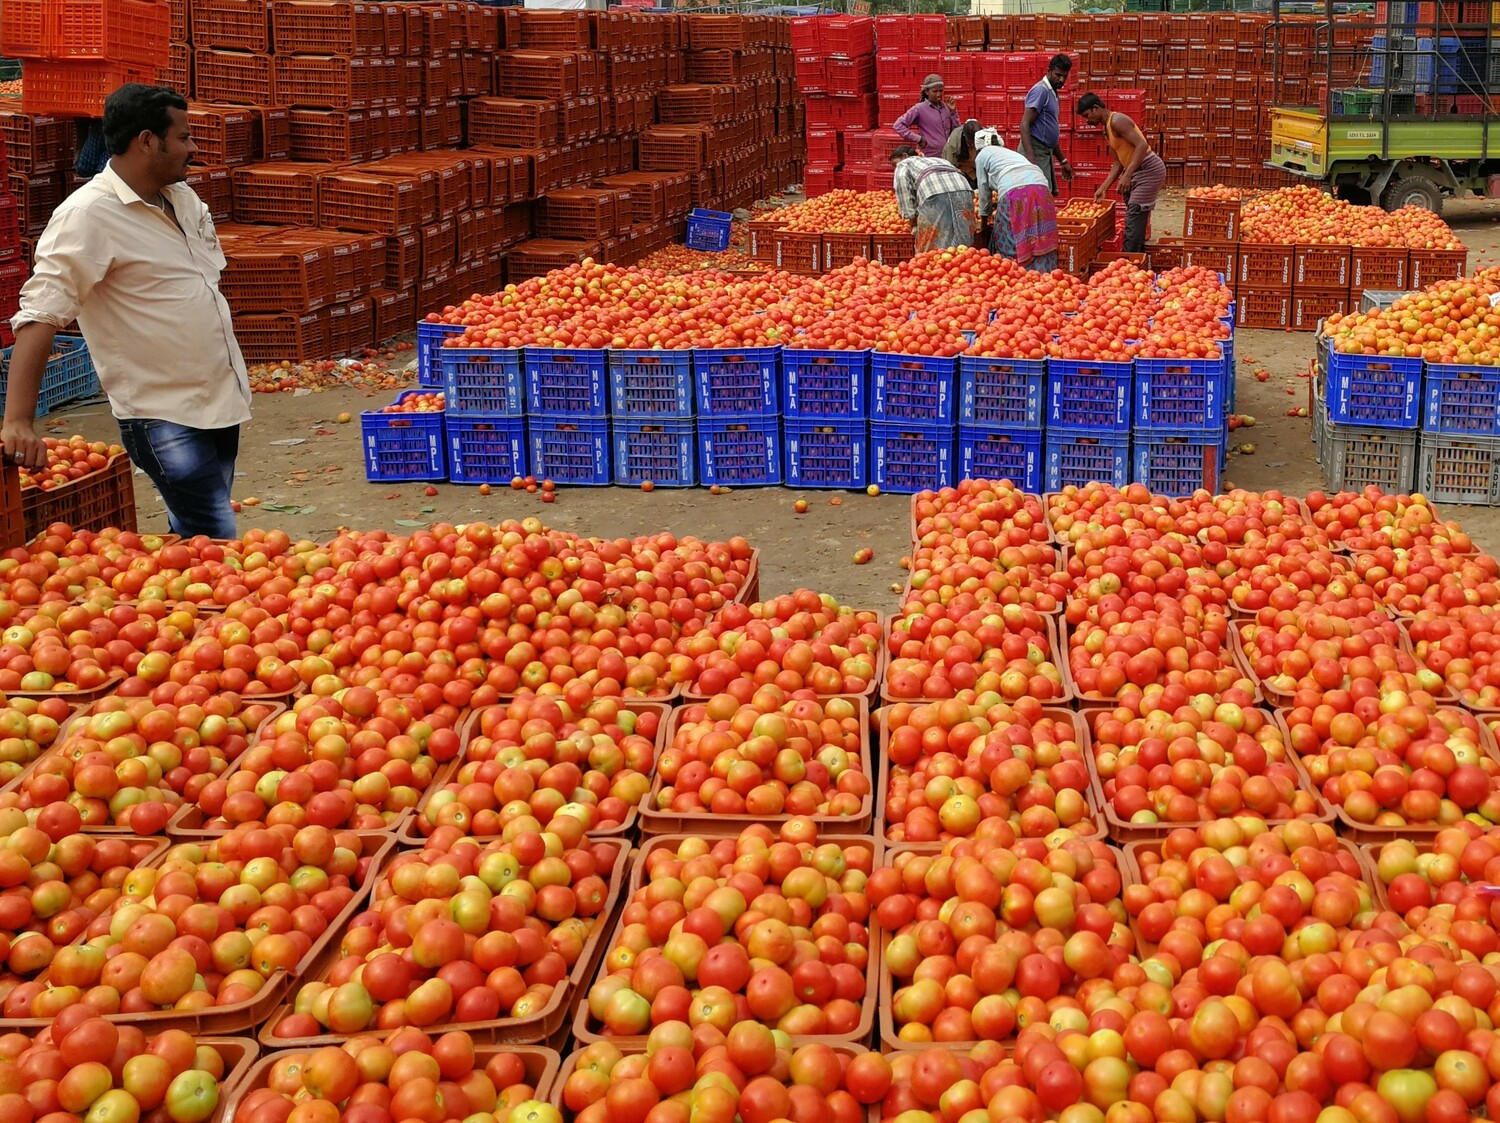 Workers packing tomatoes at the market of Madanapalle in India, from where they will be delivered across the country.